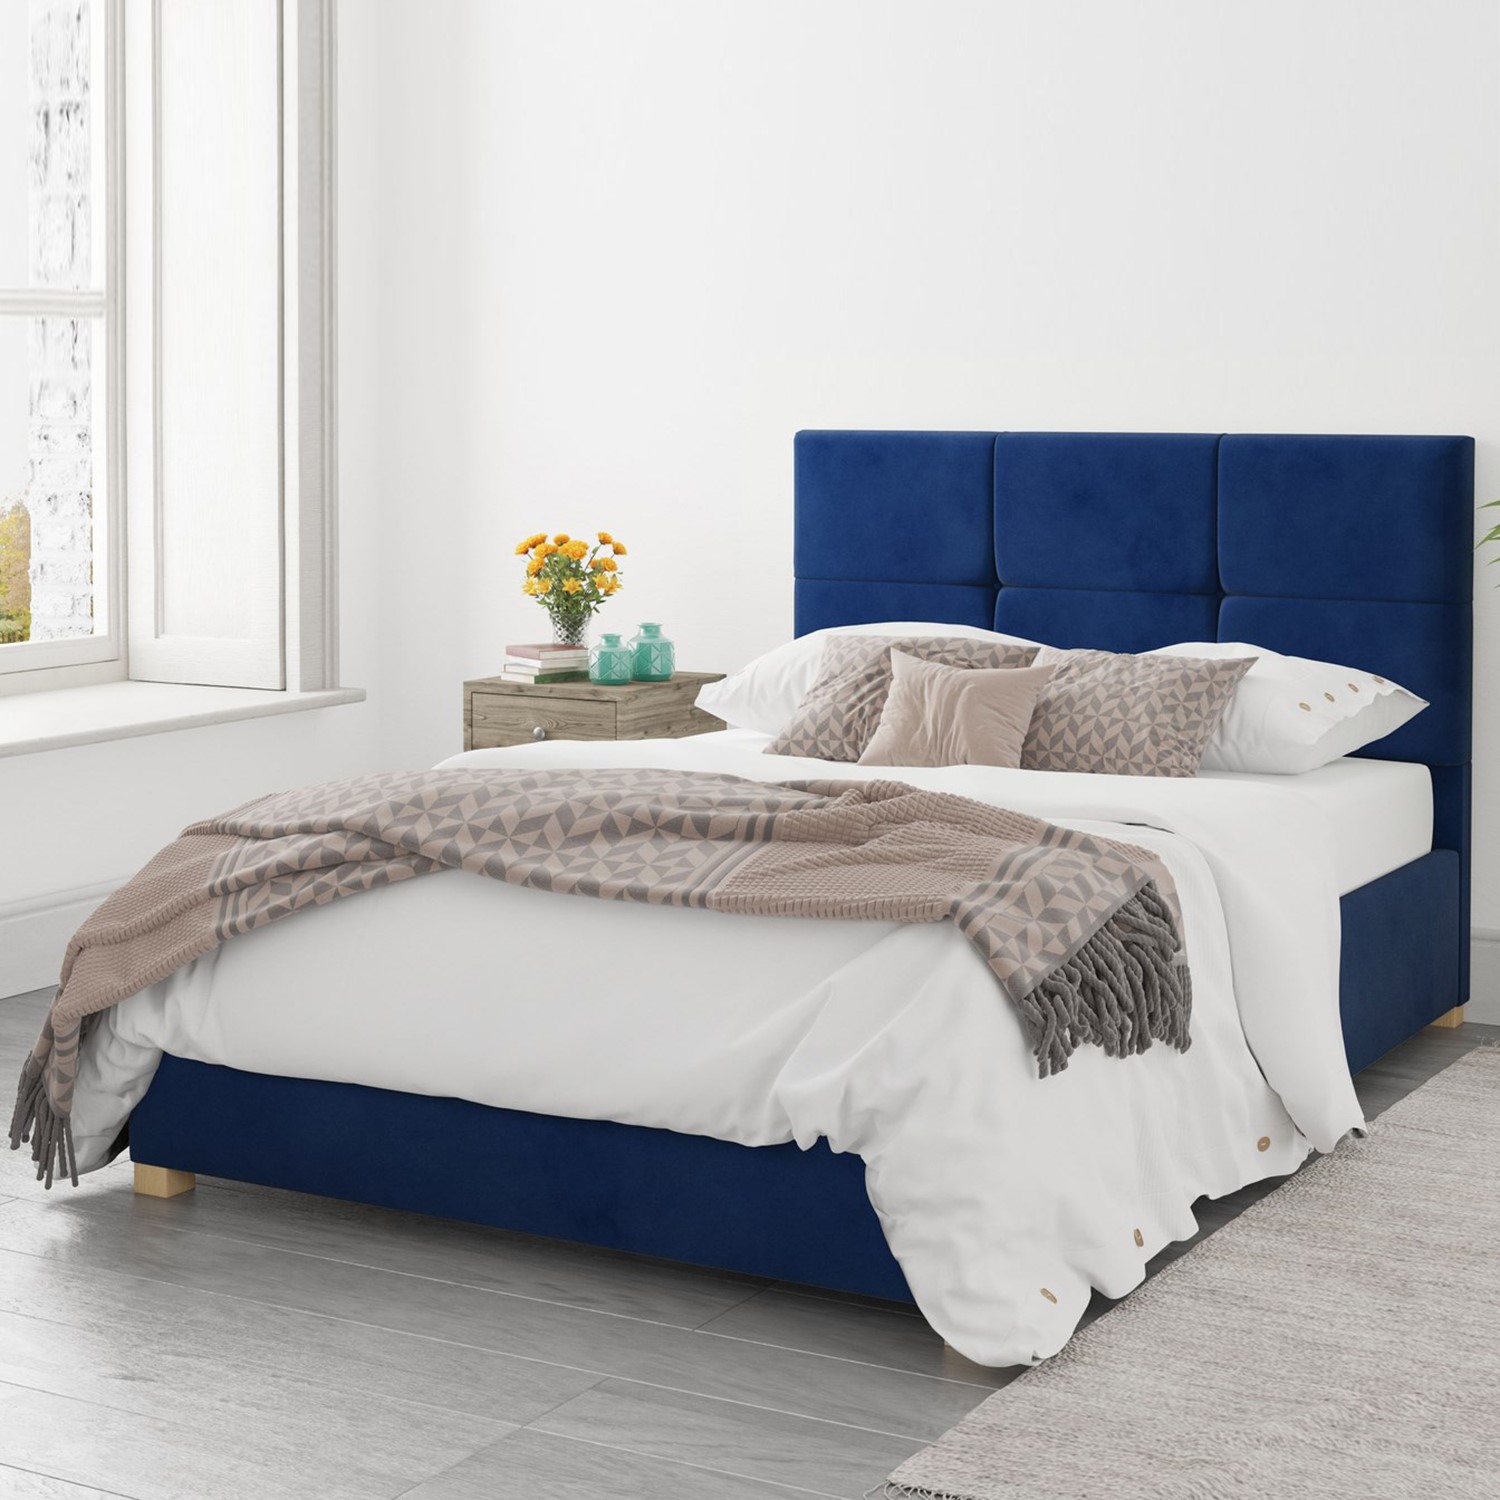 Read more about Navy blue velvet king size ottoman bed farringdon aspire